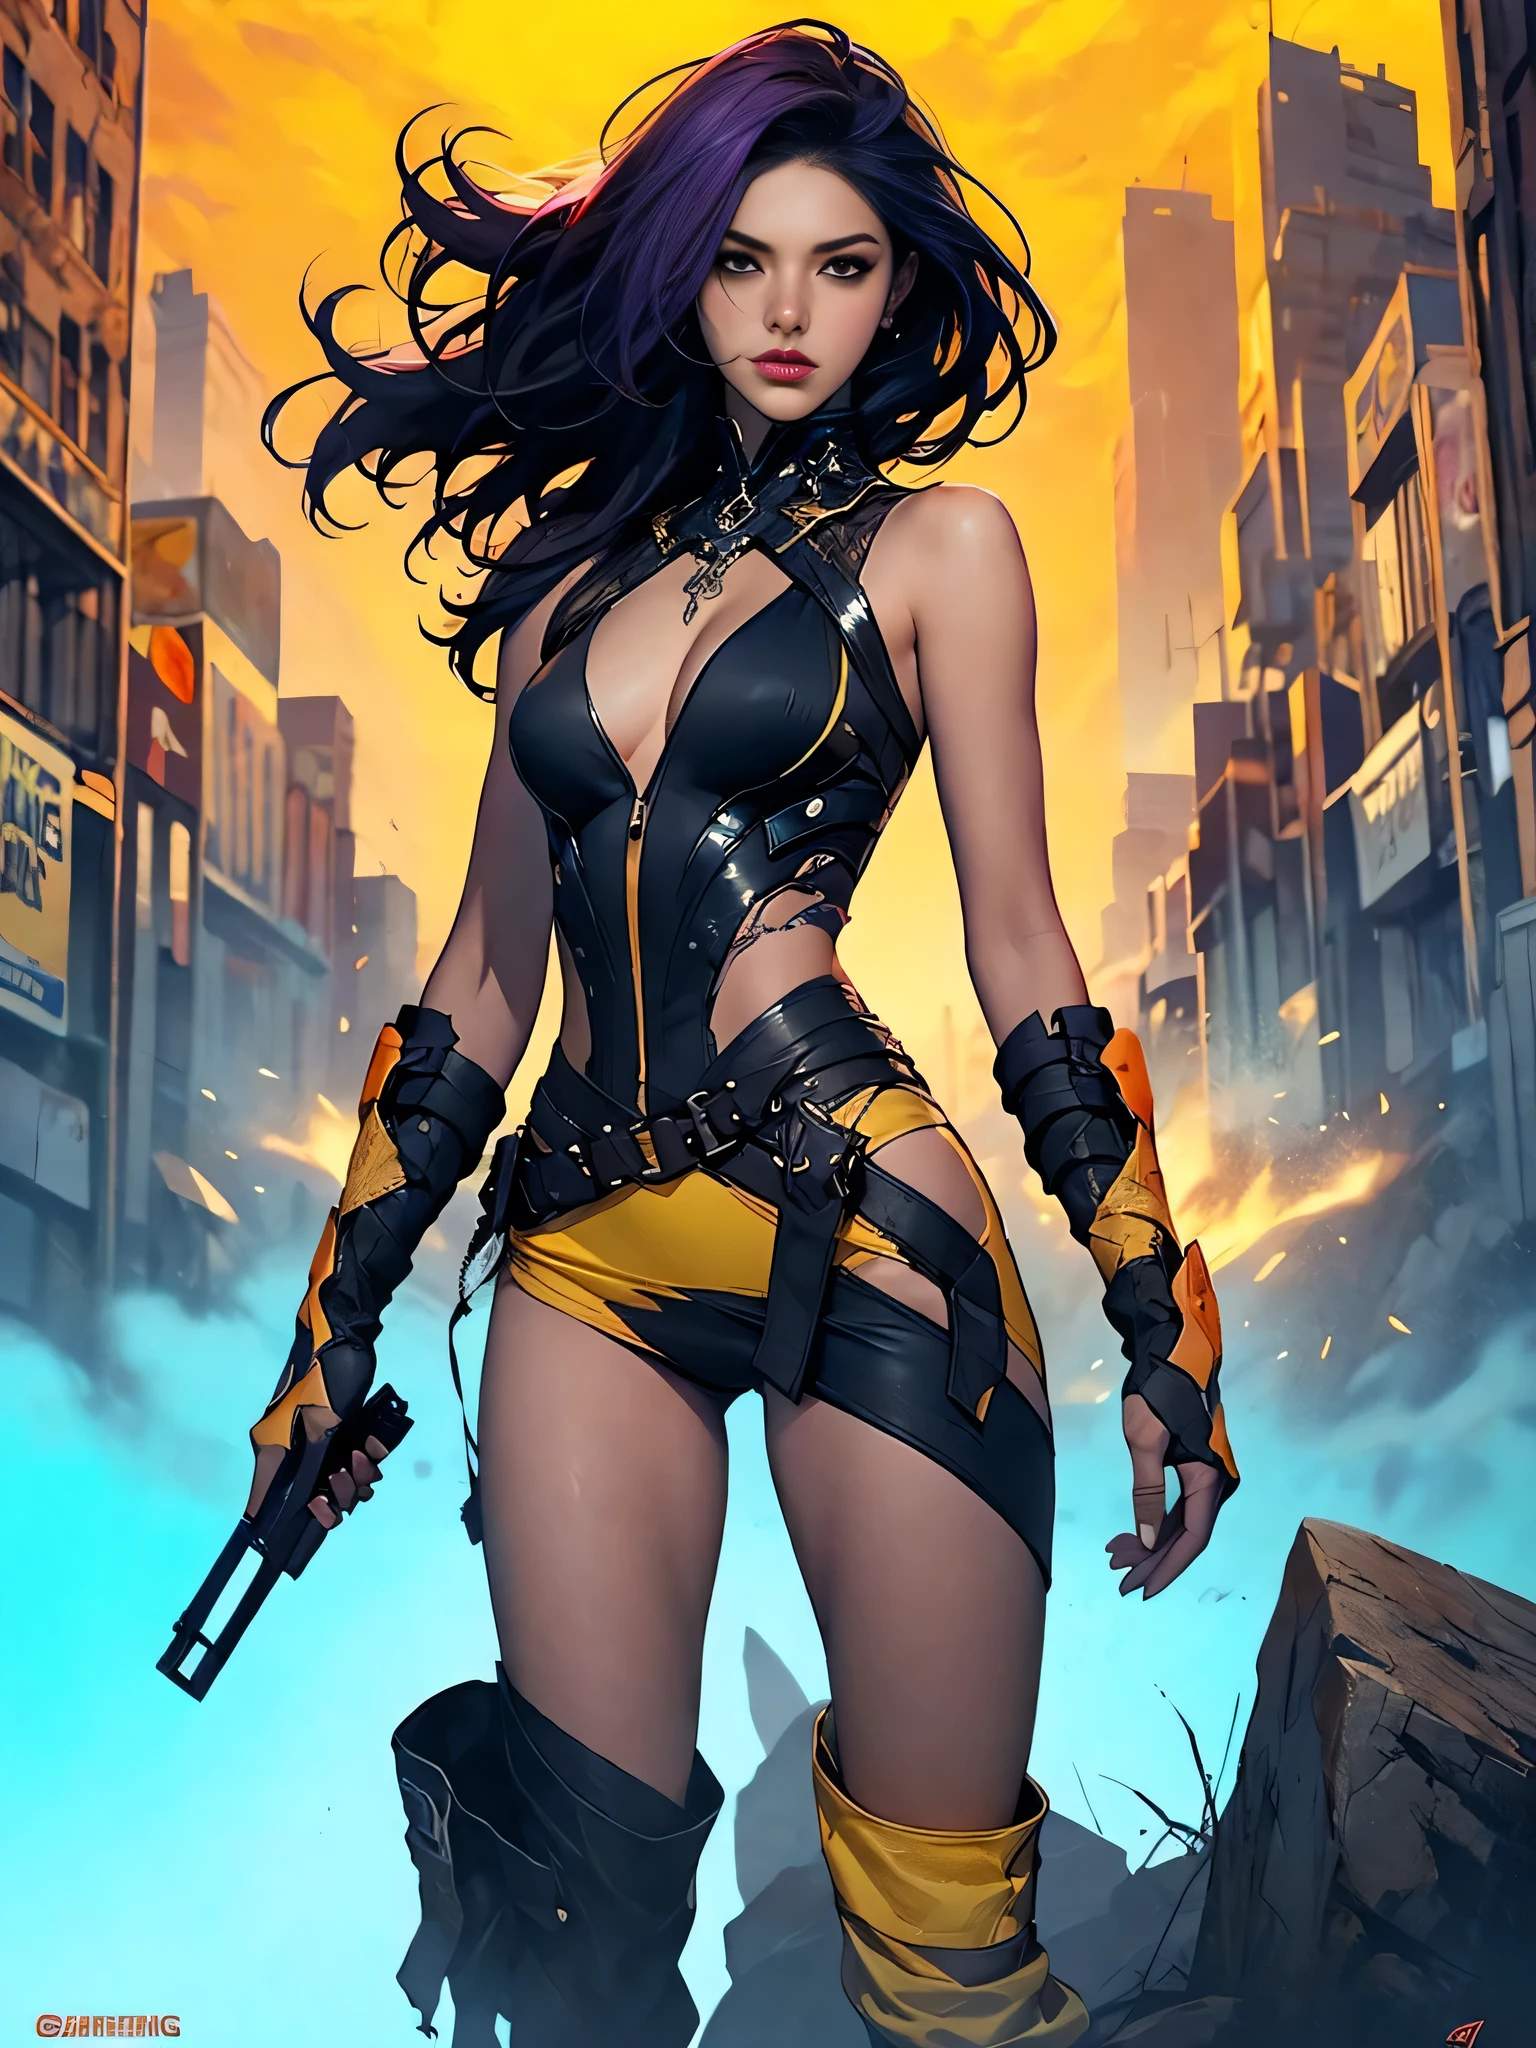 dark and torn, 1 young beautiful muscular body, fierce expression, holding a gun, (colors on her clothes, warm, orange, yellow, violet:1.3), standing on a desolate wasteland, dramatic lighting, intense shadows, sandy texture, tall contrast, vibrant colors, dynamic pose, powerful stance, rugged background, explosive atmosphere, dystopian theme, surreal elements, digitally painted illustration, HD resolution, intricate details, dramatic composition, avant-garde and chaotic brush strokes, gothic style, intense emotions, epic scale, raw and gritty feel, captivating and provocative artwork.
